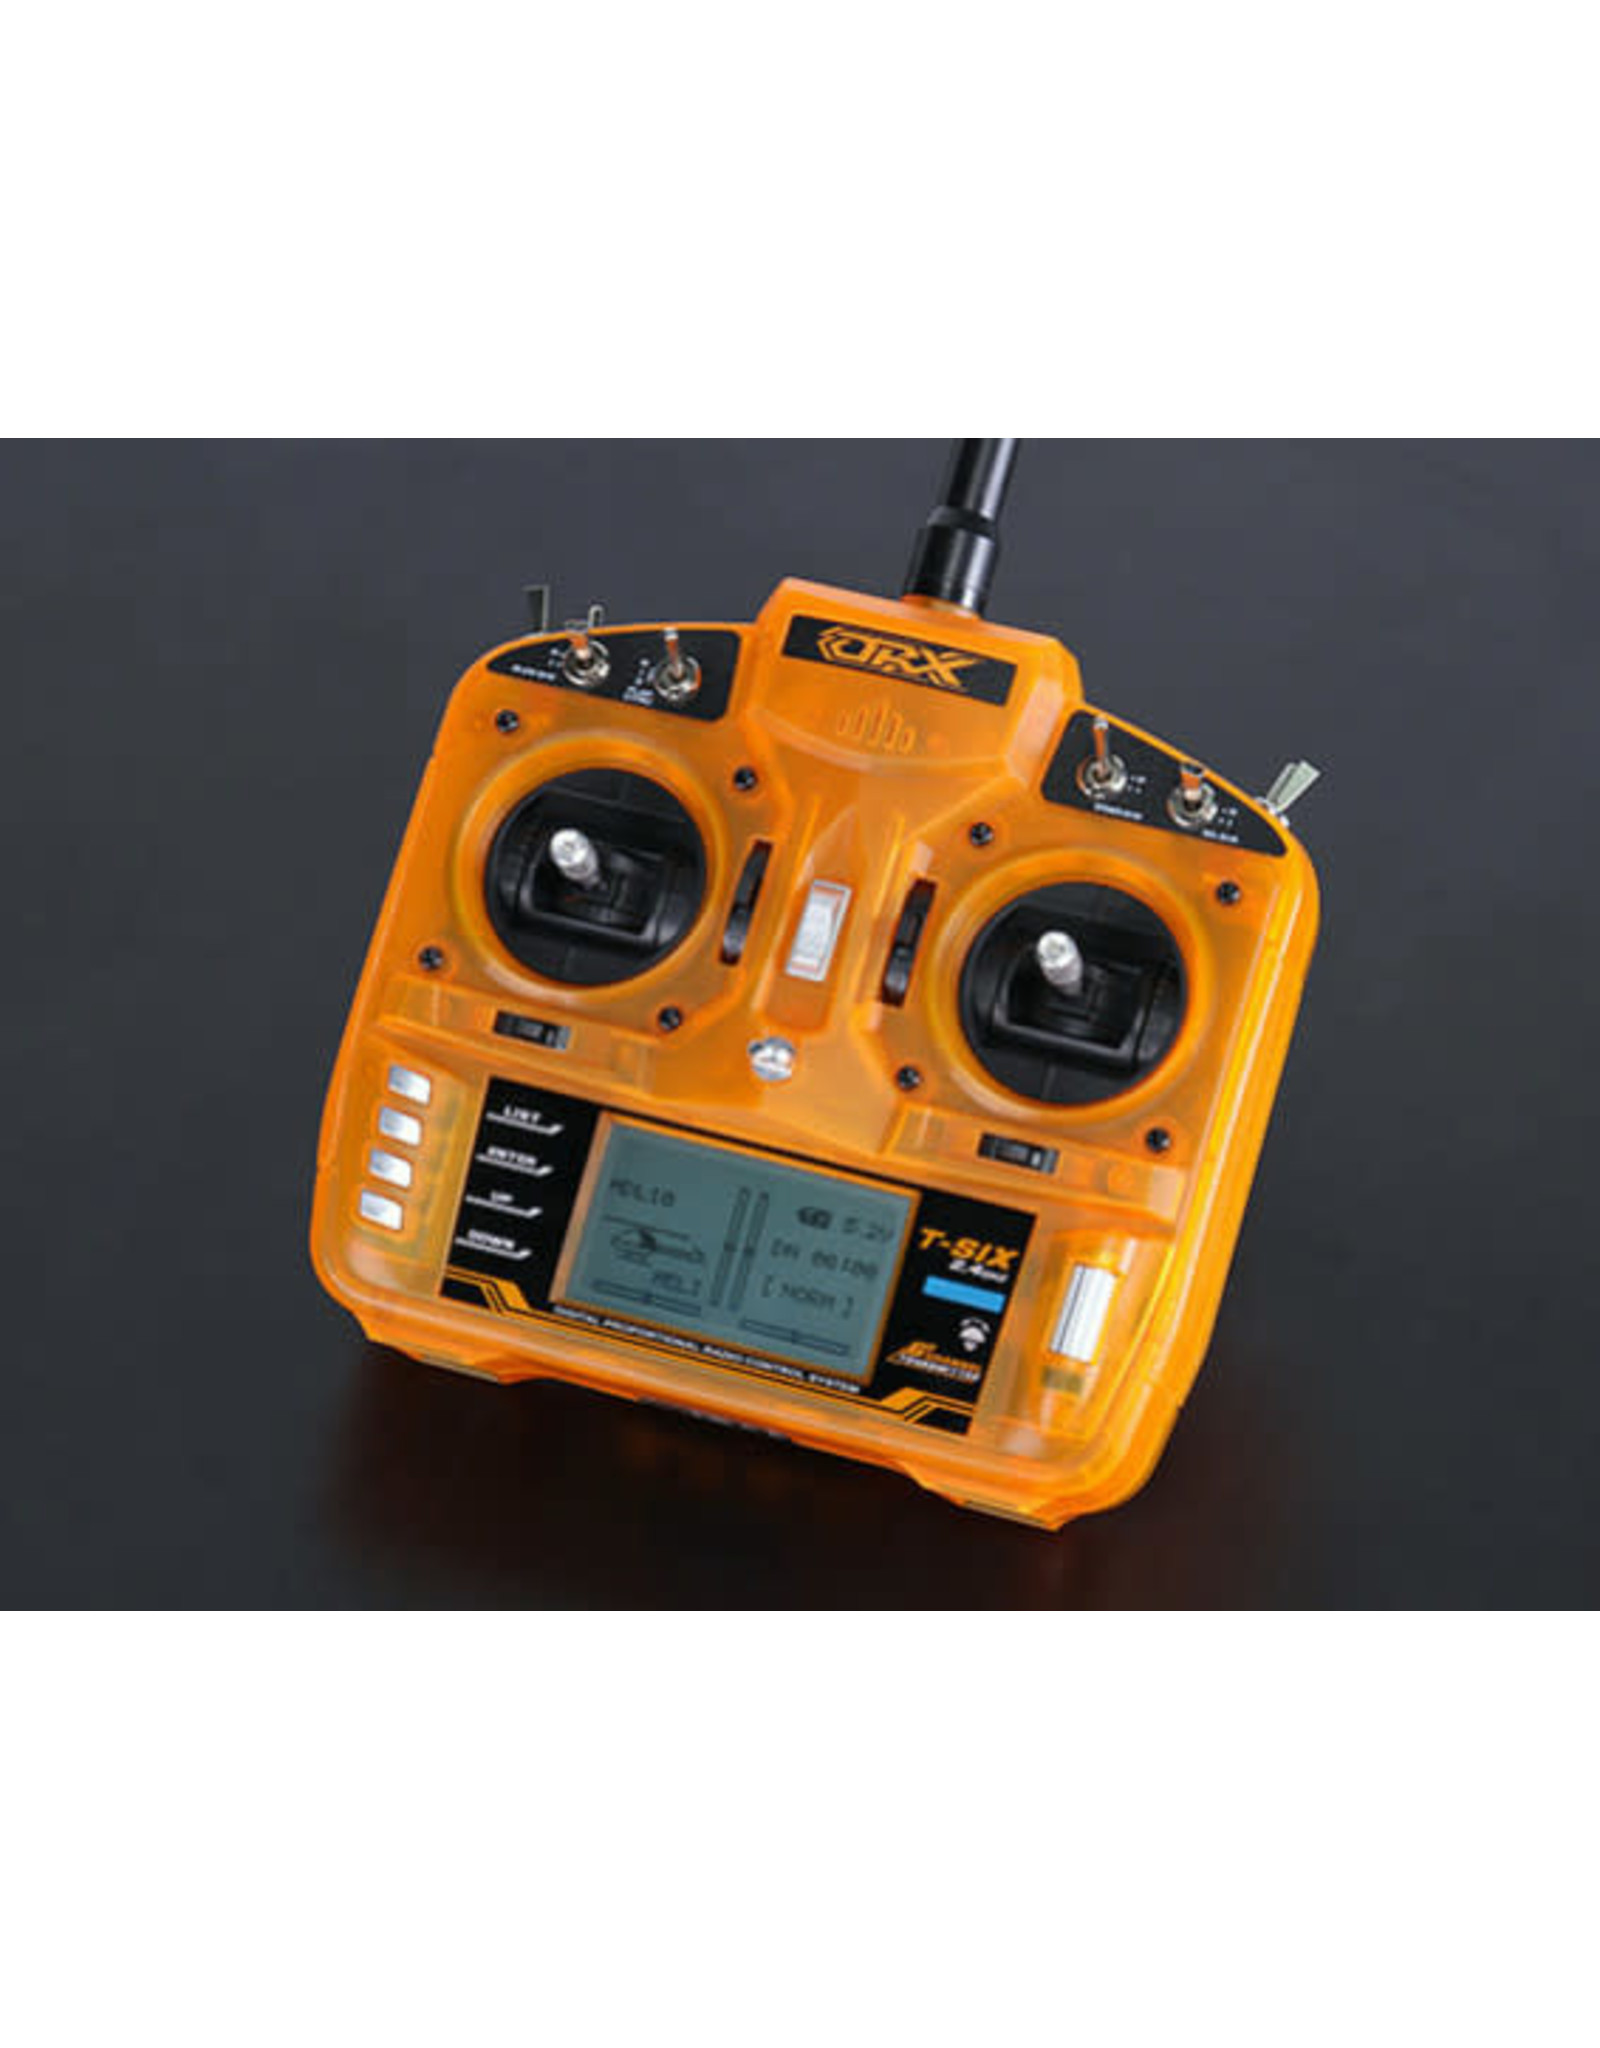 Orx OrangeRx T-SIX 2.4GHz DSM2 Compatible 6CH Transmitter w/10 Model Memory and 3-Pos Switch (Mode 2)Used